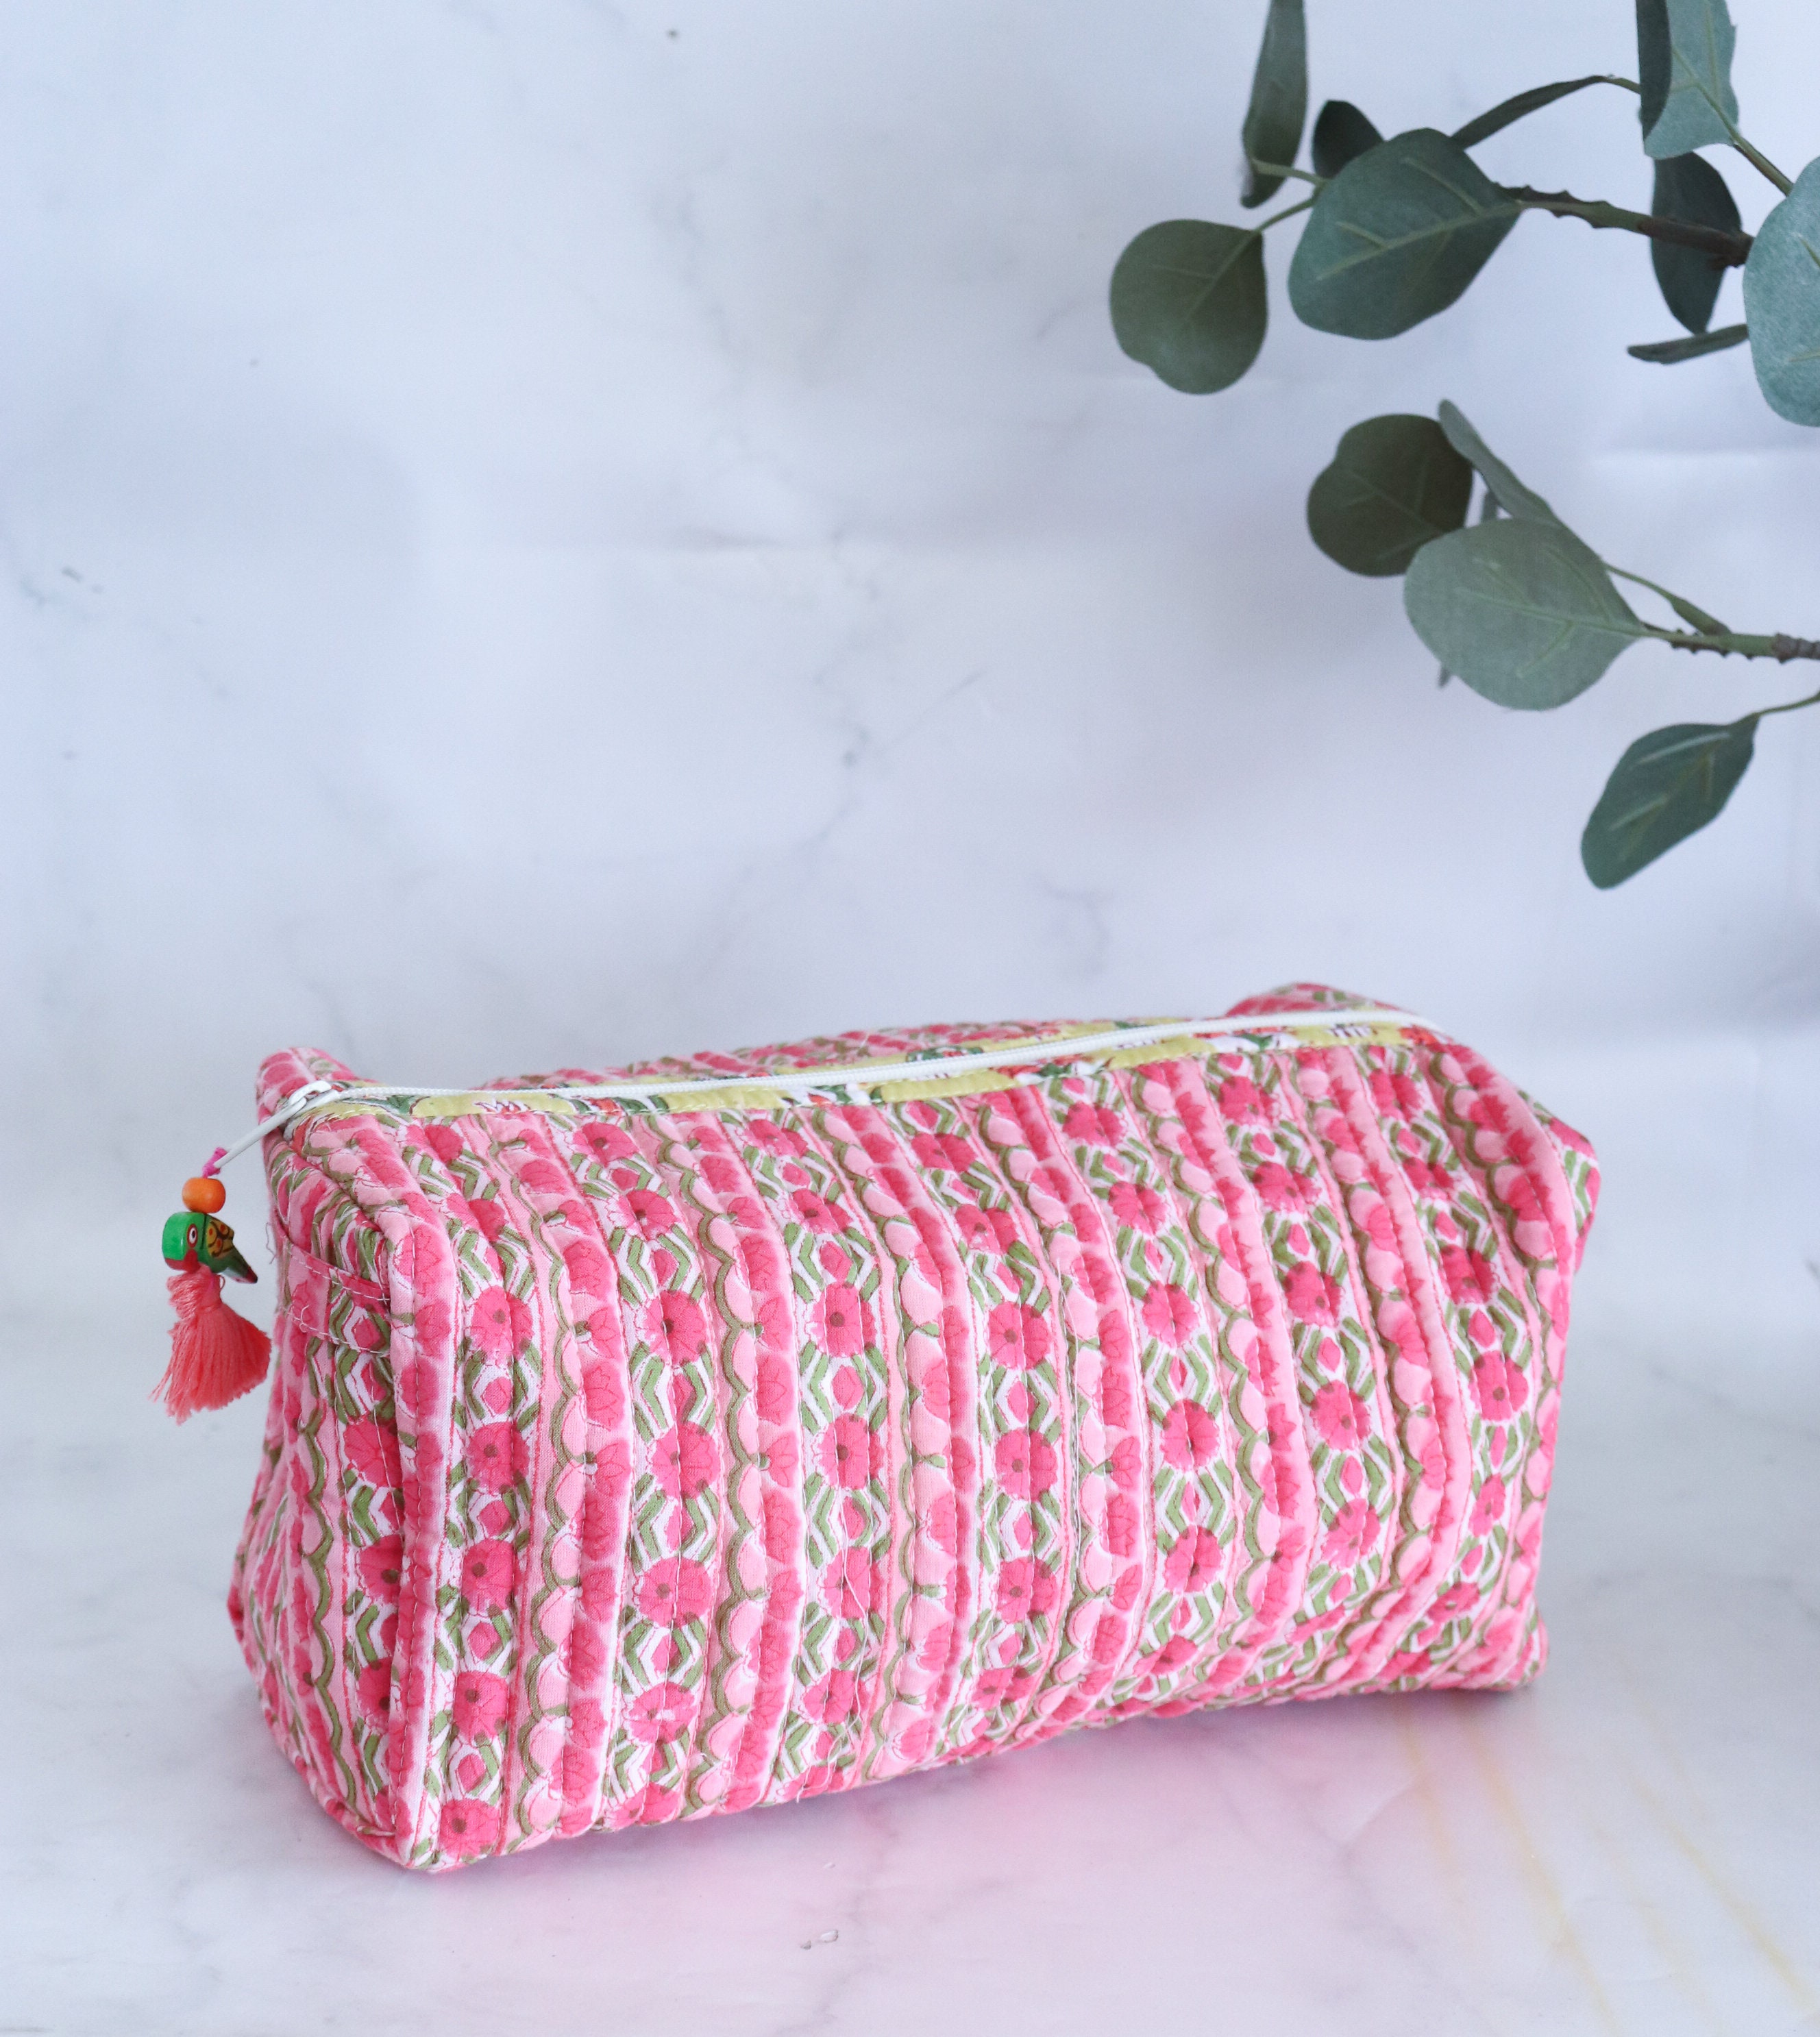 Block Print Designer Toiletry Bag & Makeup Case - Boho Floral Quilted Pouch  for Cosmetics, Skincare - Large Waterproof Lined Organizer for Diaper Bag